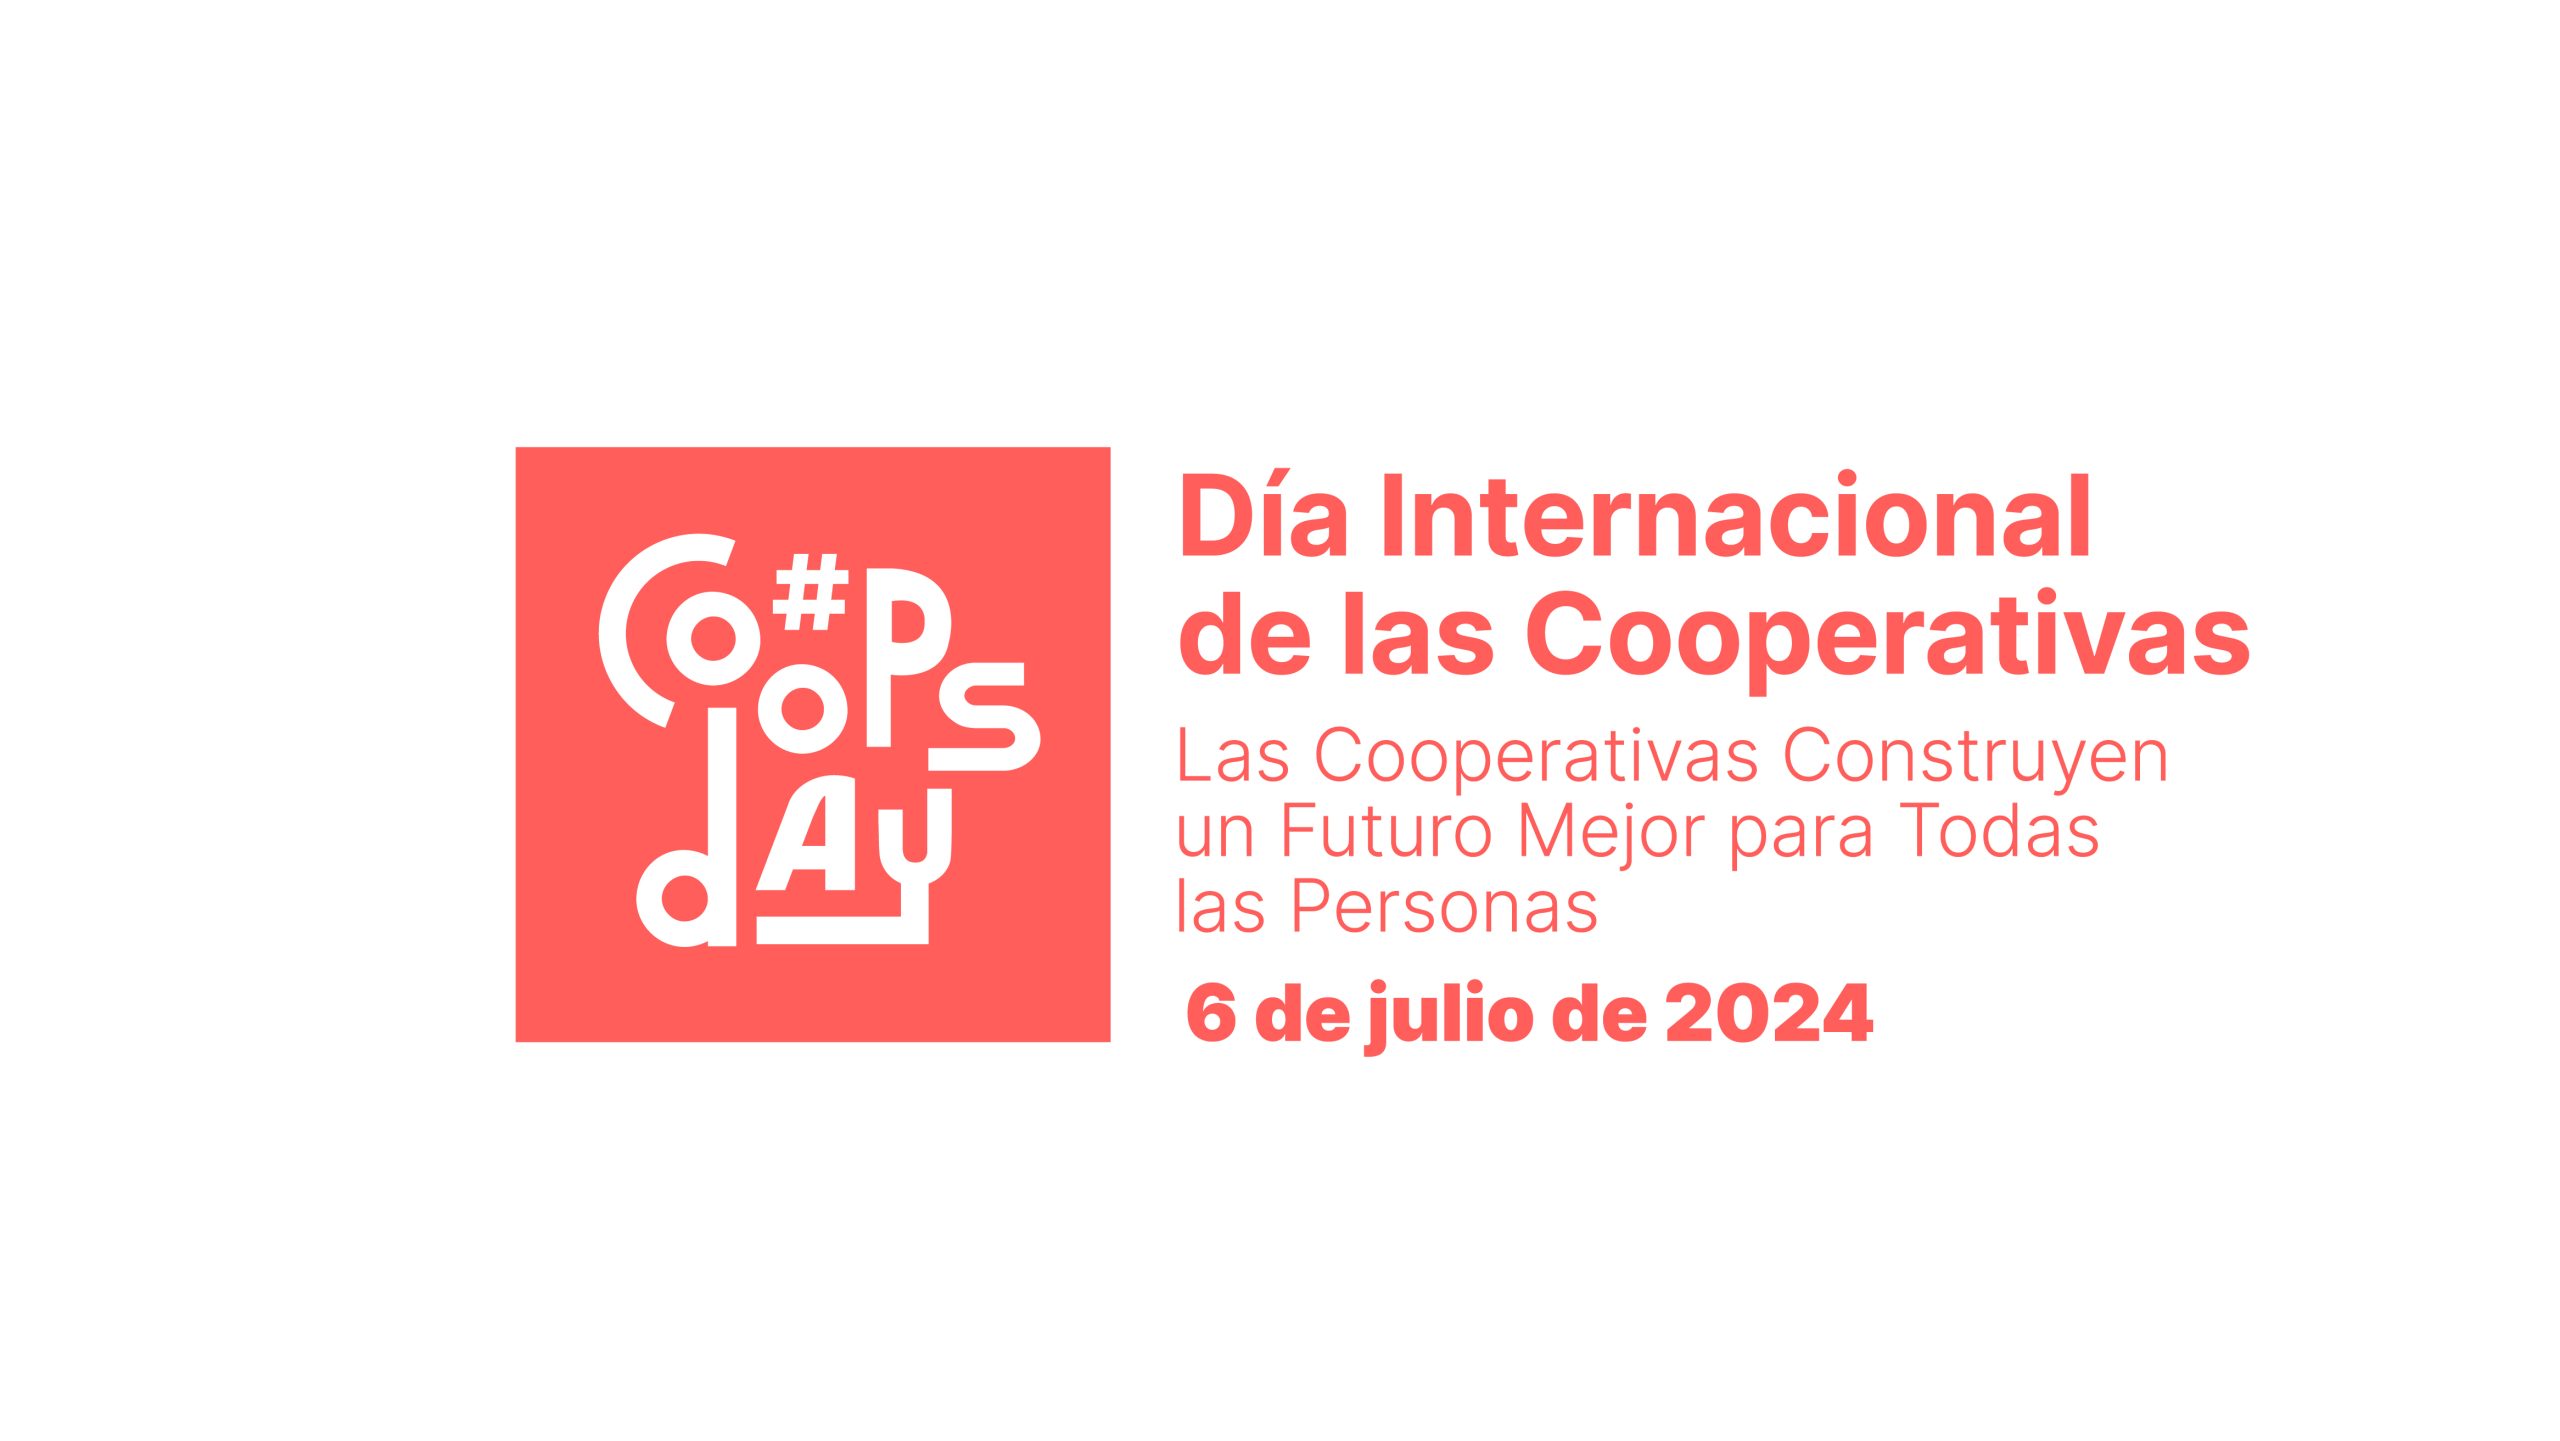 COOPSDAY